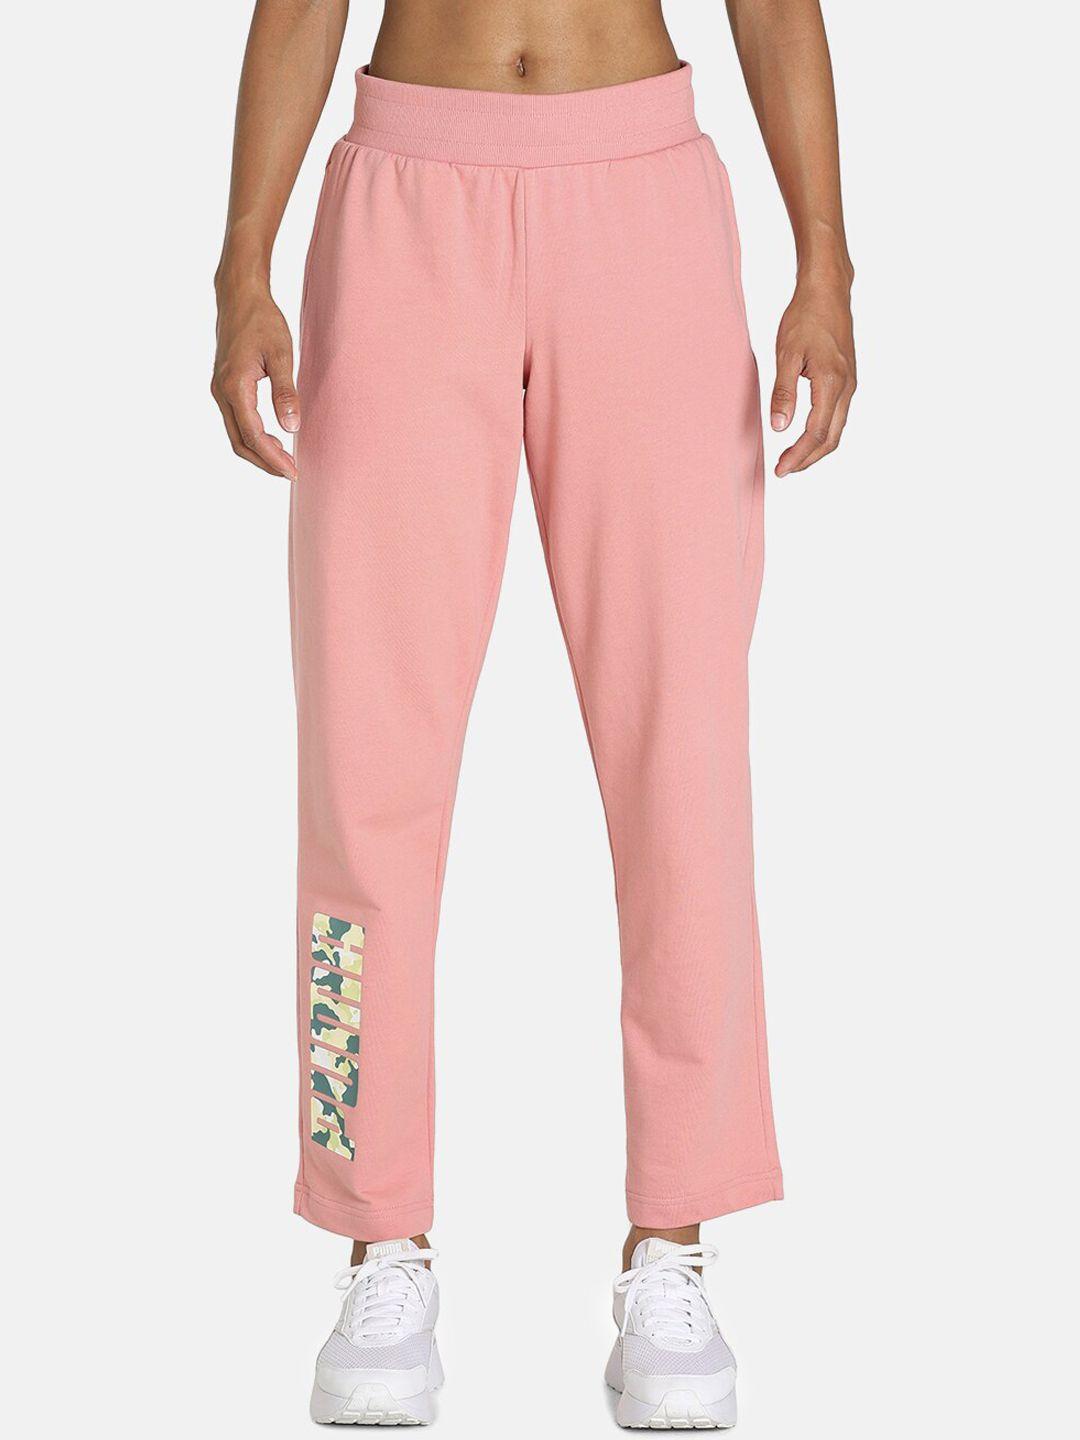 puma-women-rose-solid-drycell-cotton-cropped-sports-track-pant